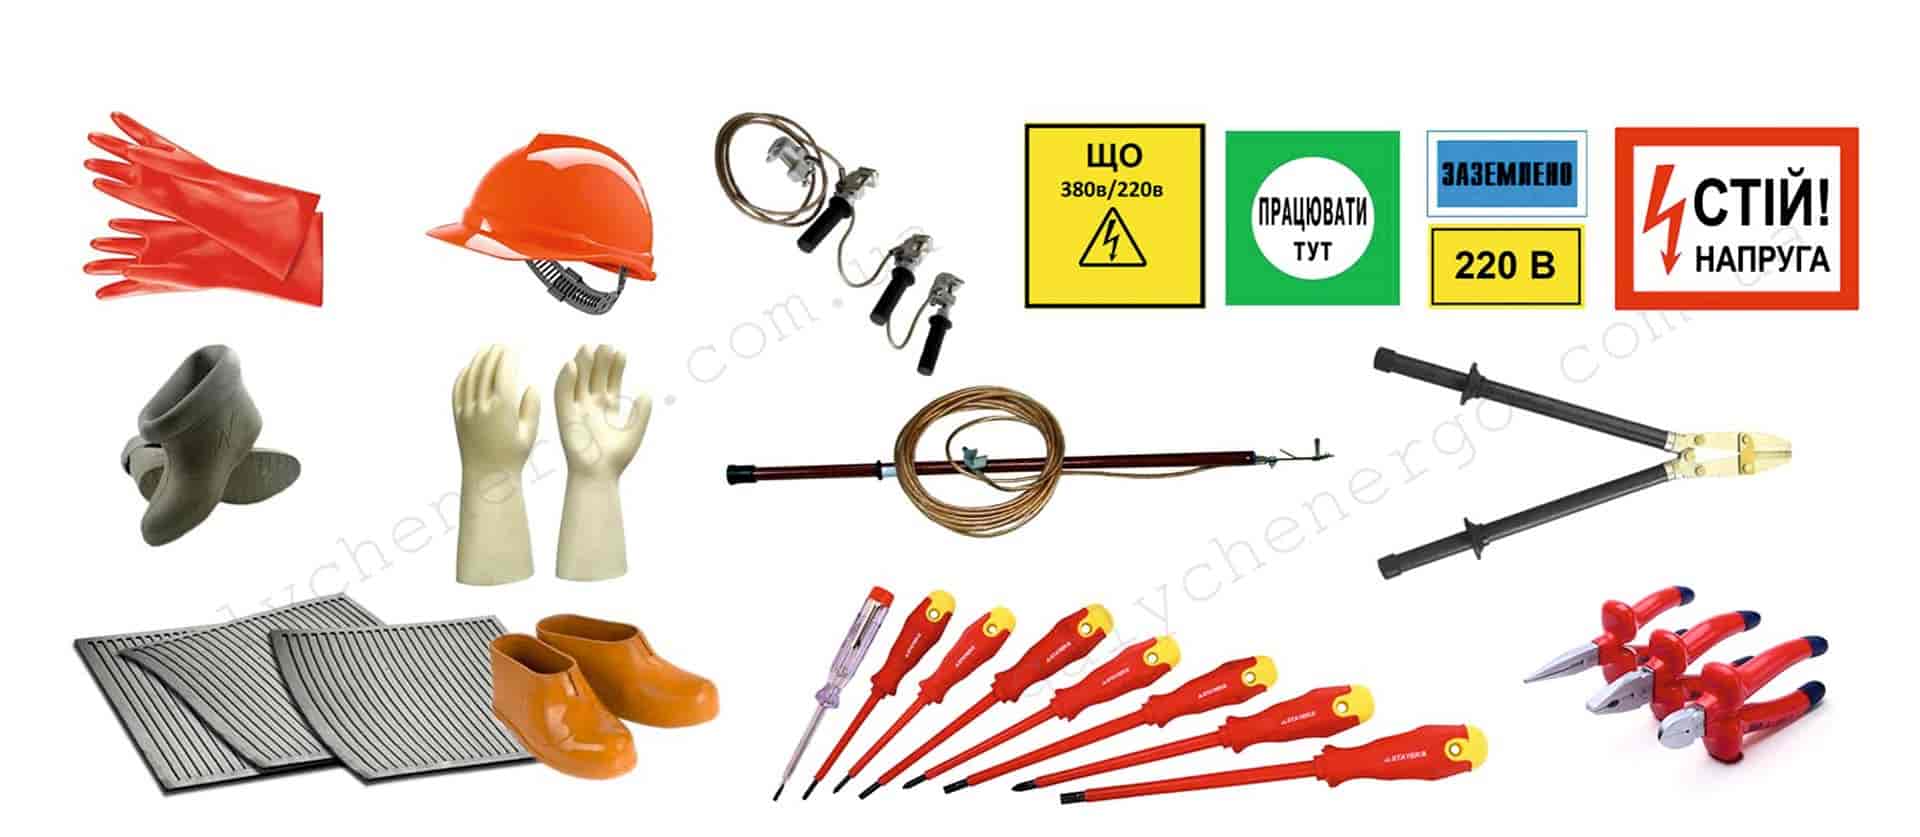 Means of protection and tools